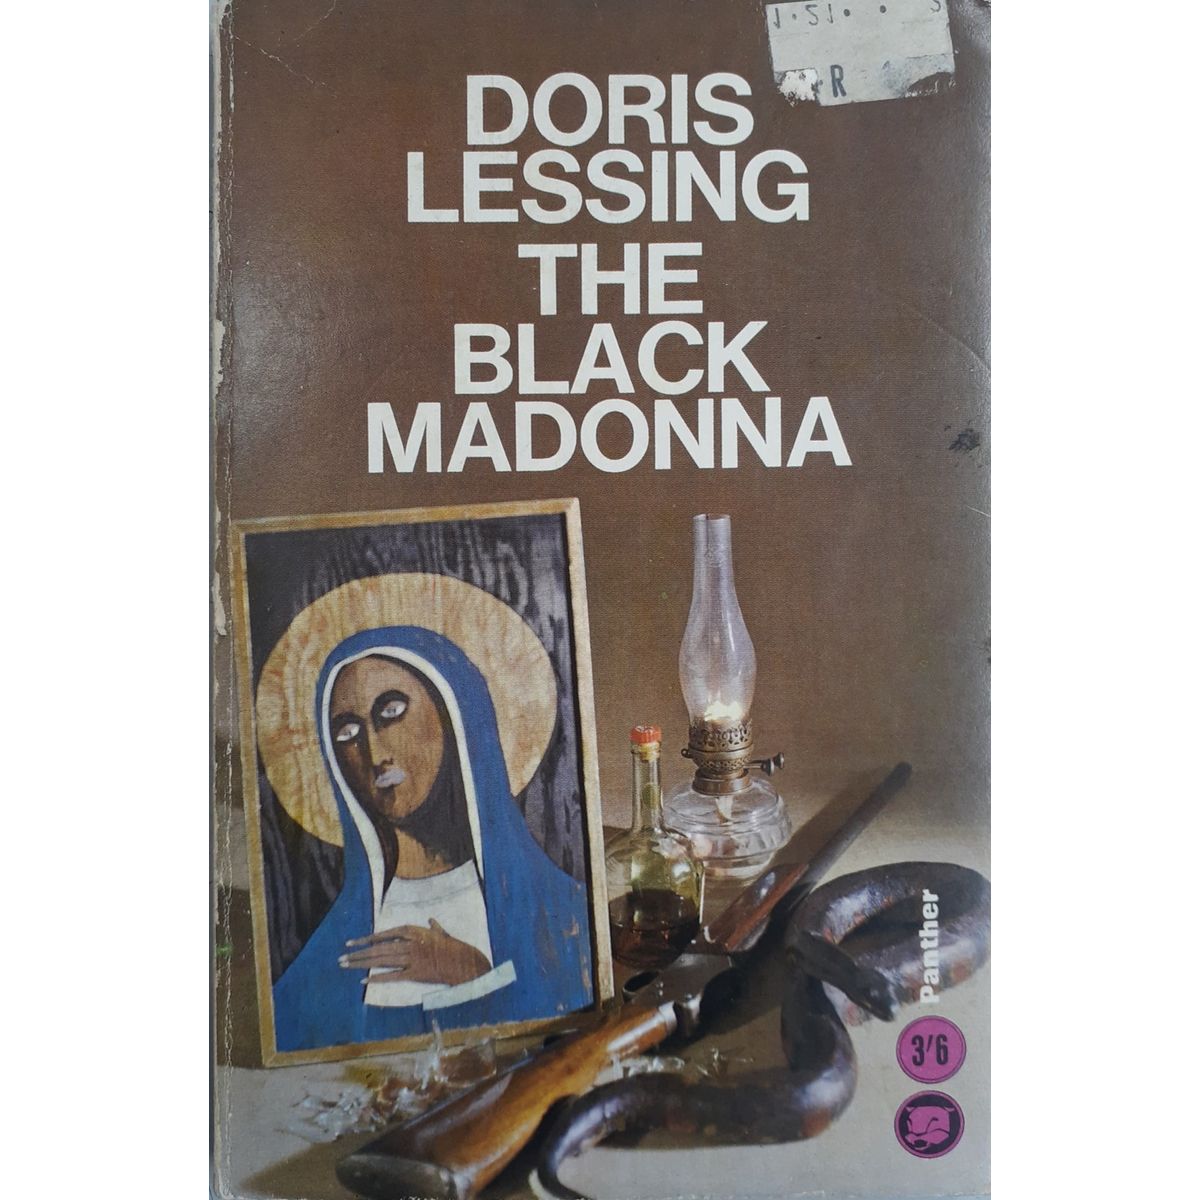 The Black Madonna by Dorris Lessing, 1st Edition [1966]